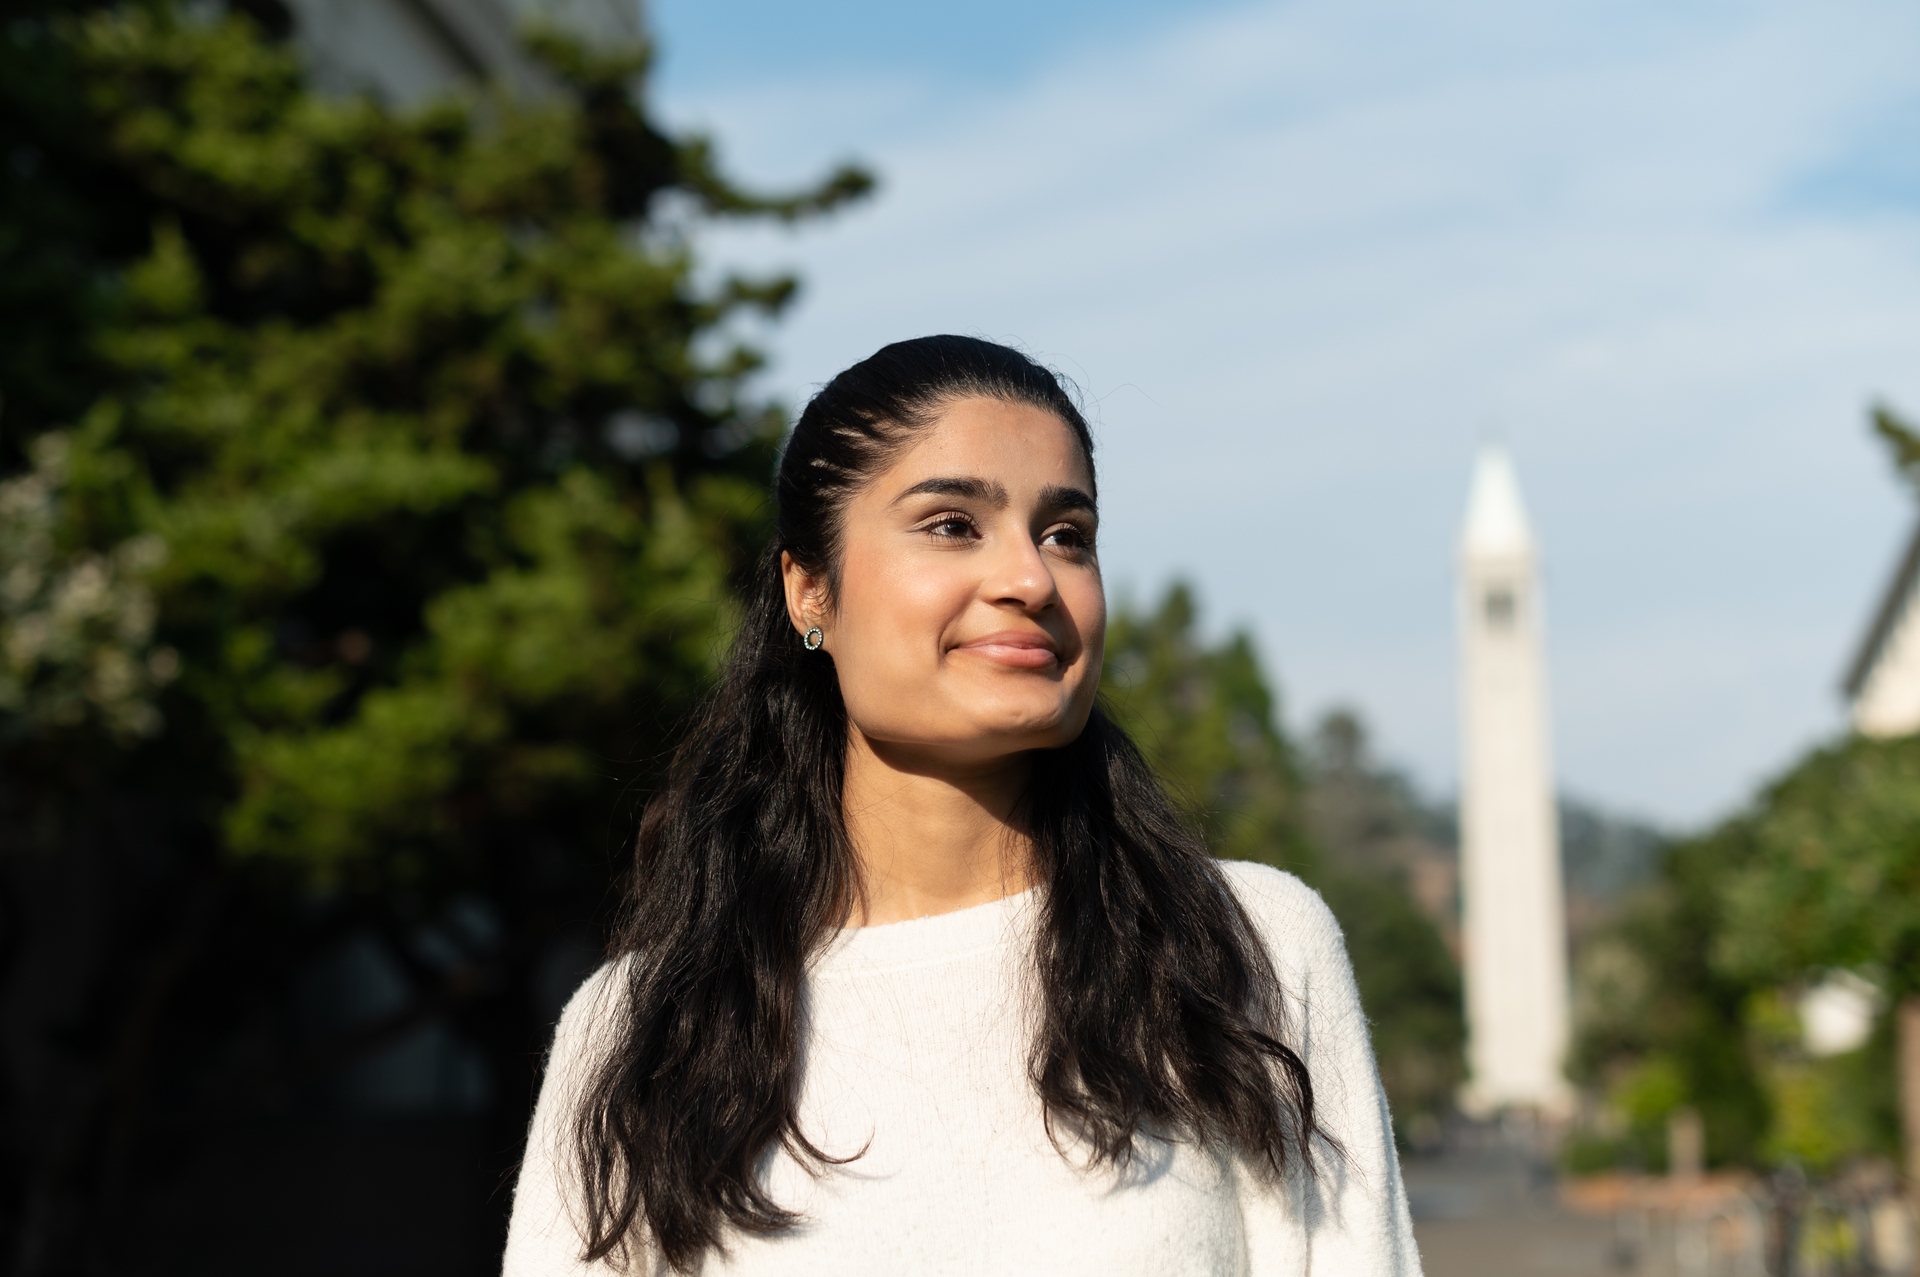 A headshot of Alishba wearing a white blouse, standing outside with the campanile in the background looking towards the distance.